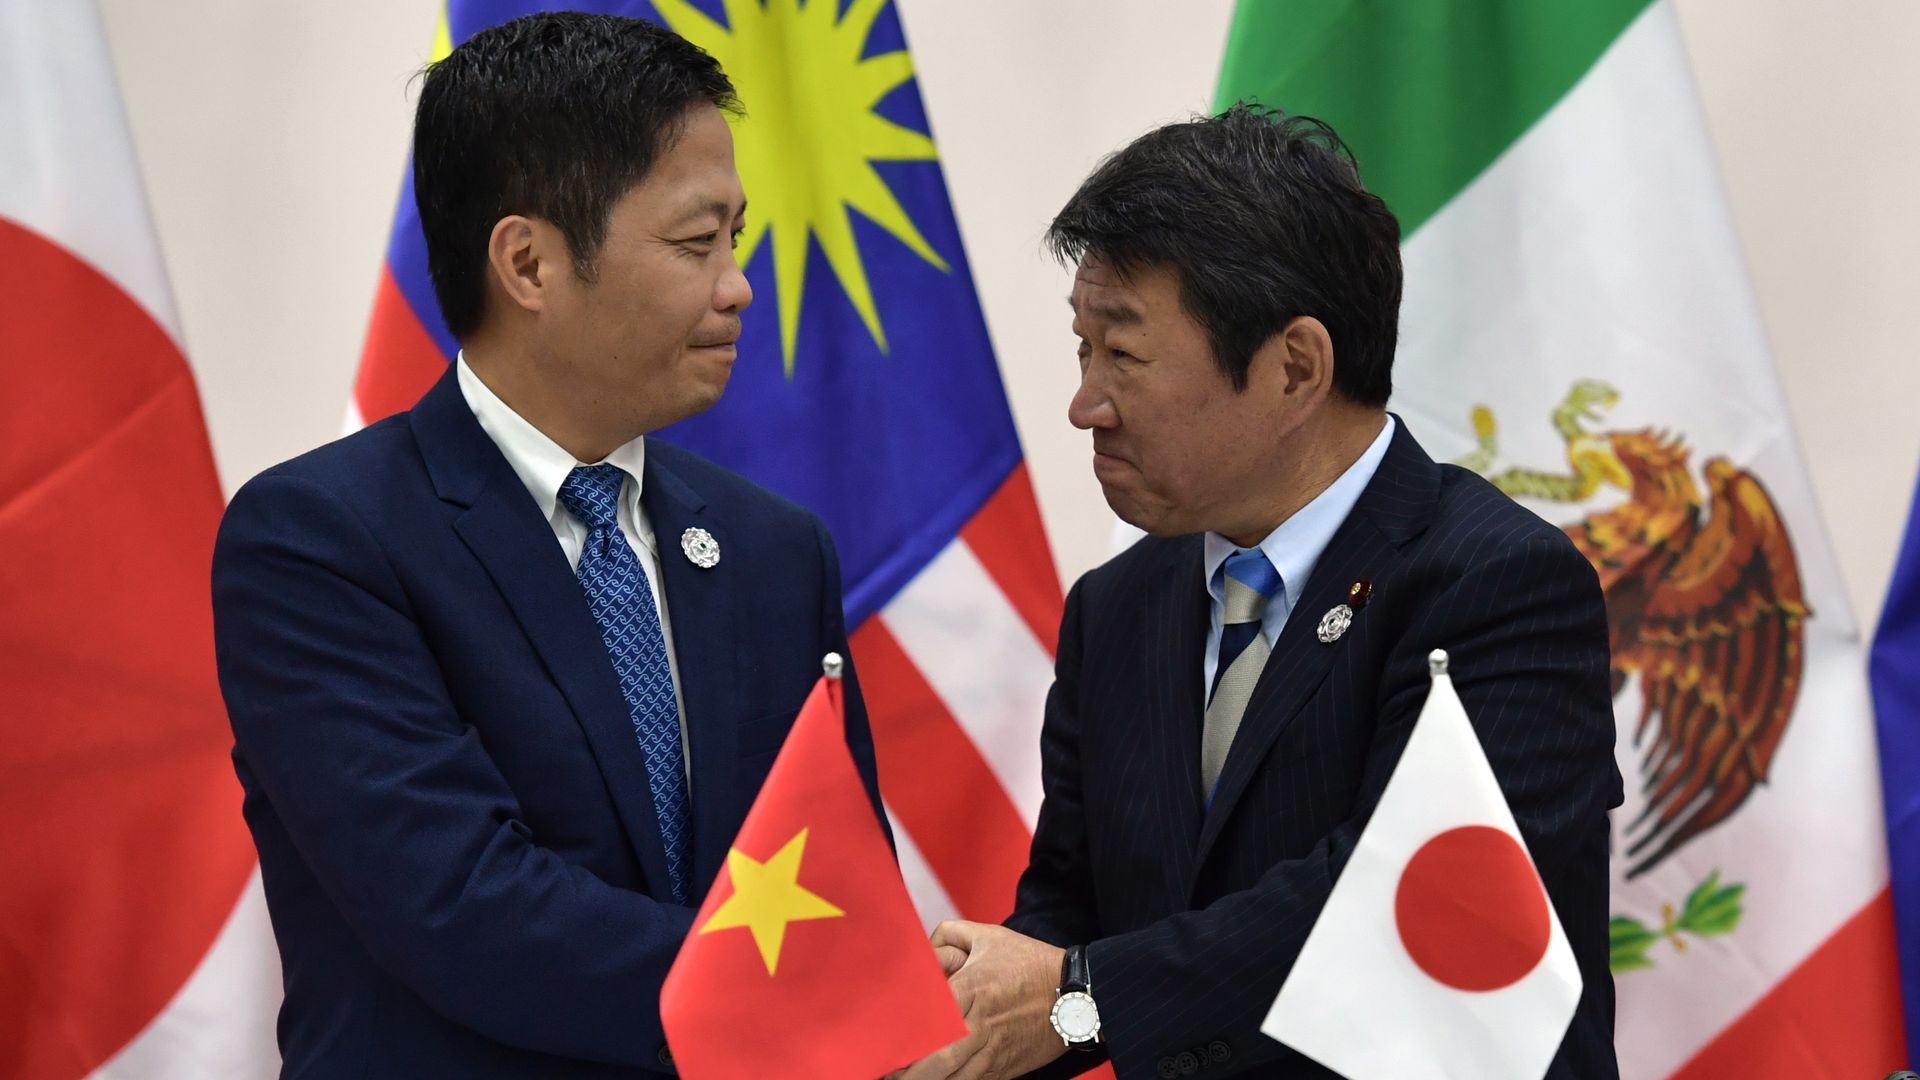 Ministers from Vietnam and Japan shaking hands